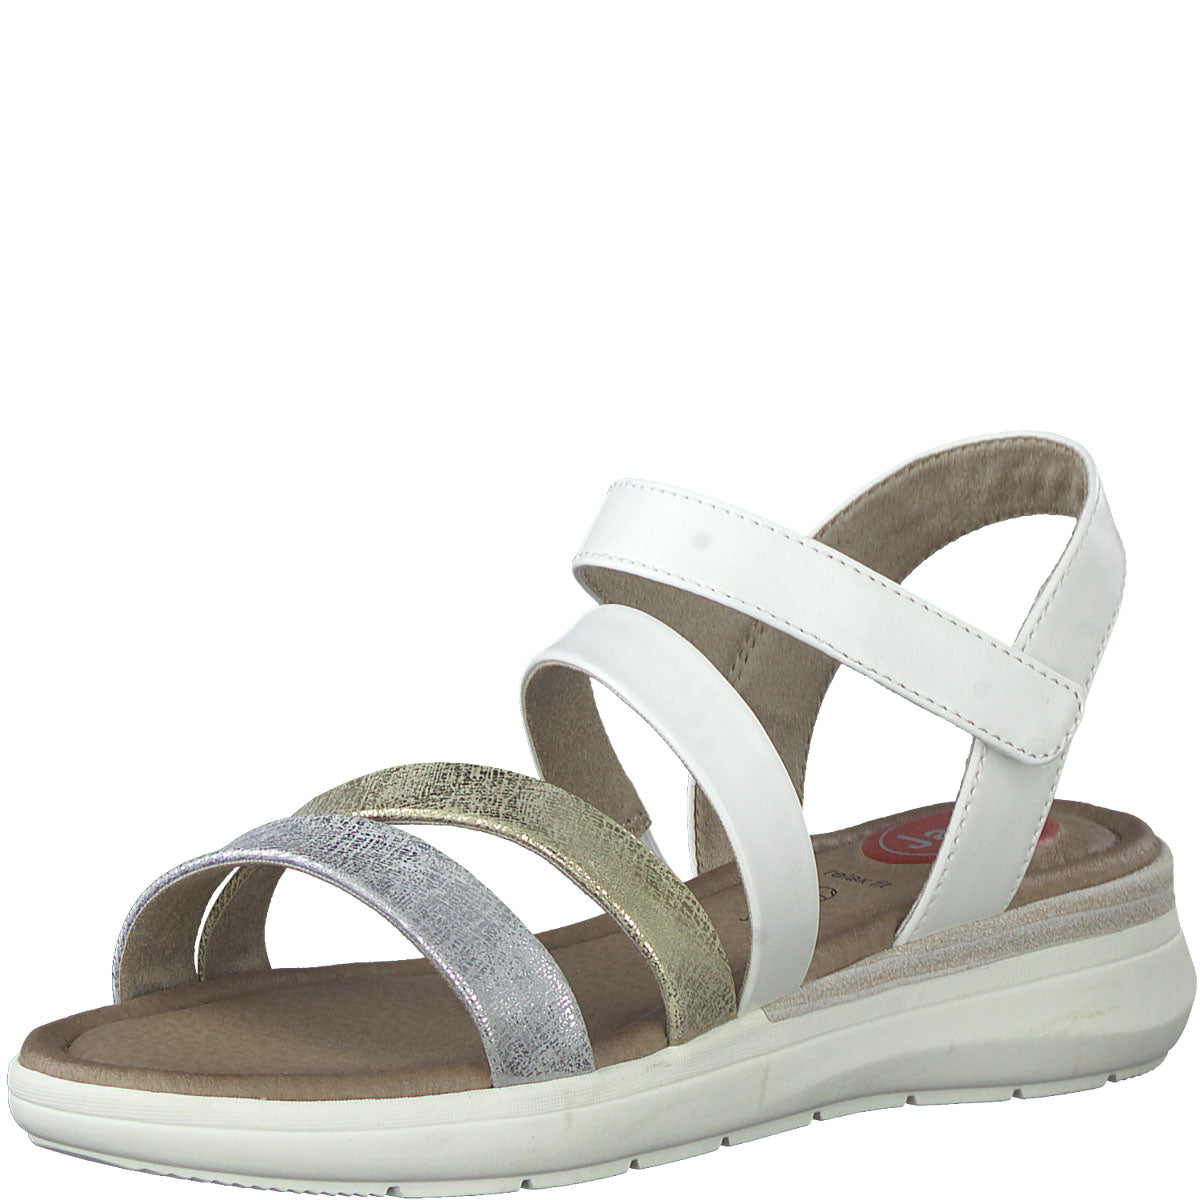 Comfortable White Summer Sandals with Velcro & Strappy Design